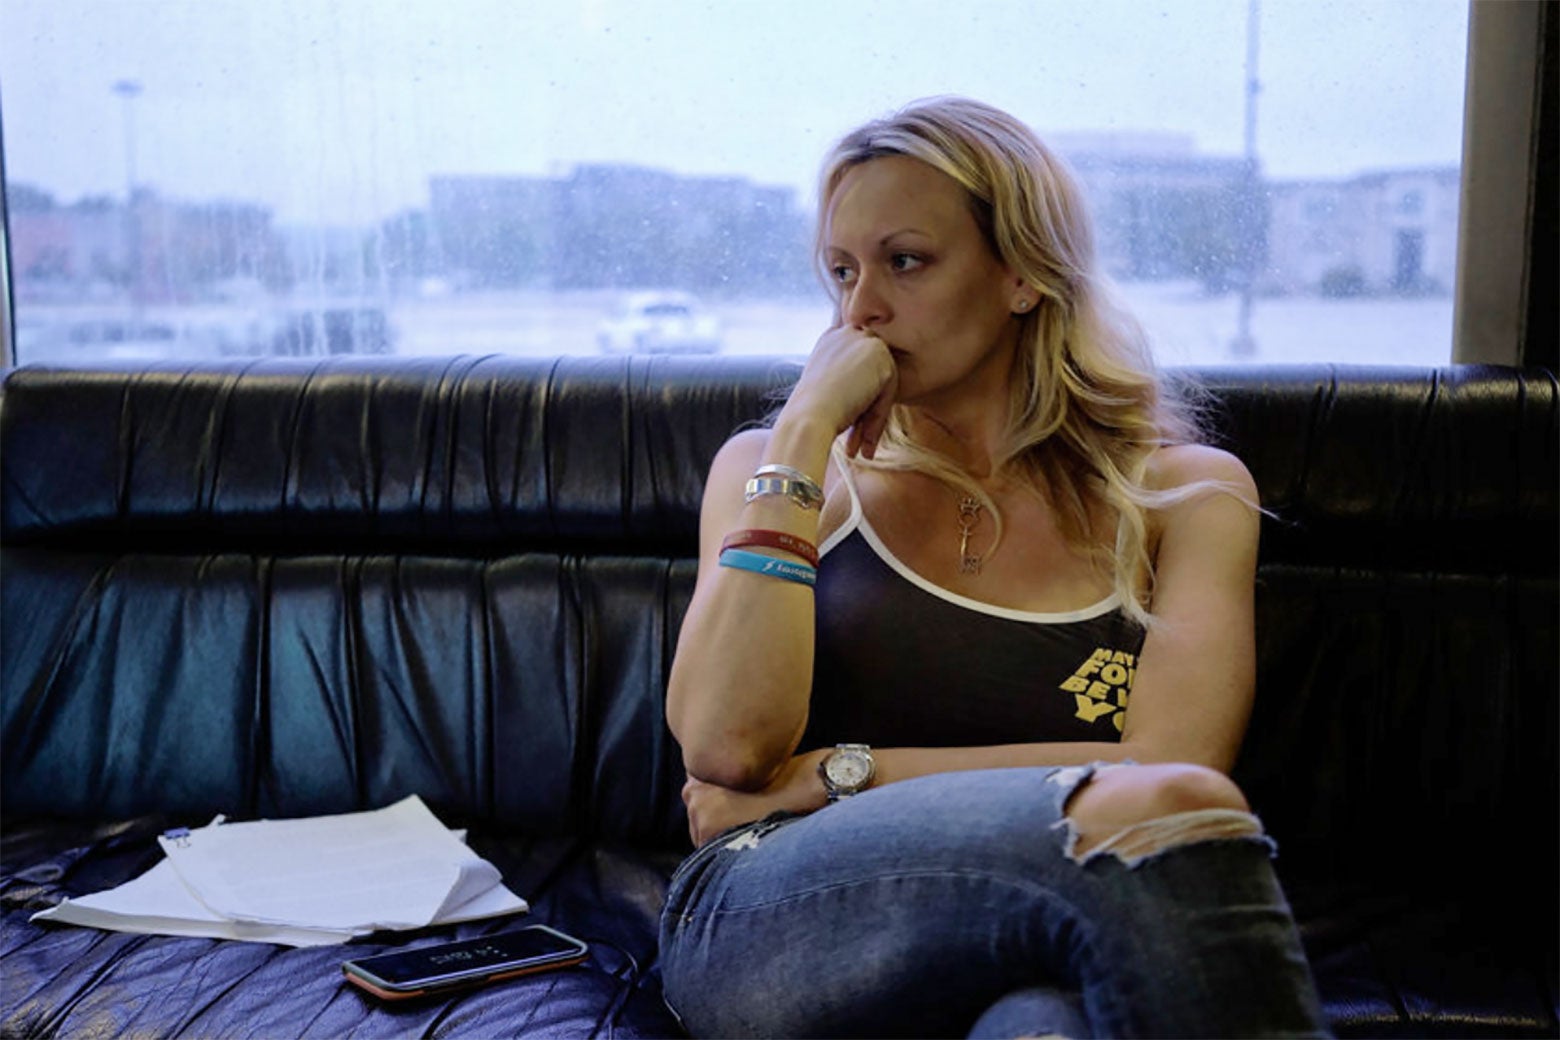 Stormy Daniels sits on a couch and looks to the side, hand to her face in concern. There is a cellphone and papers on the couch next to her.